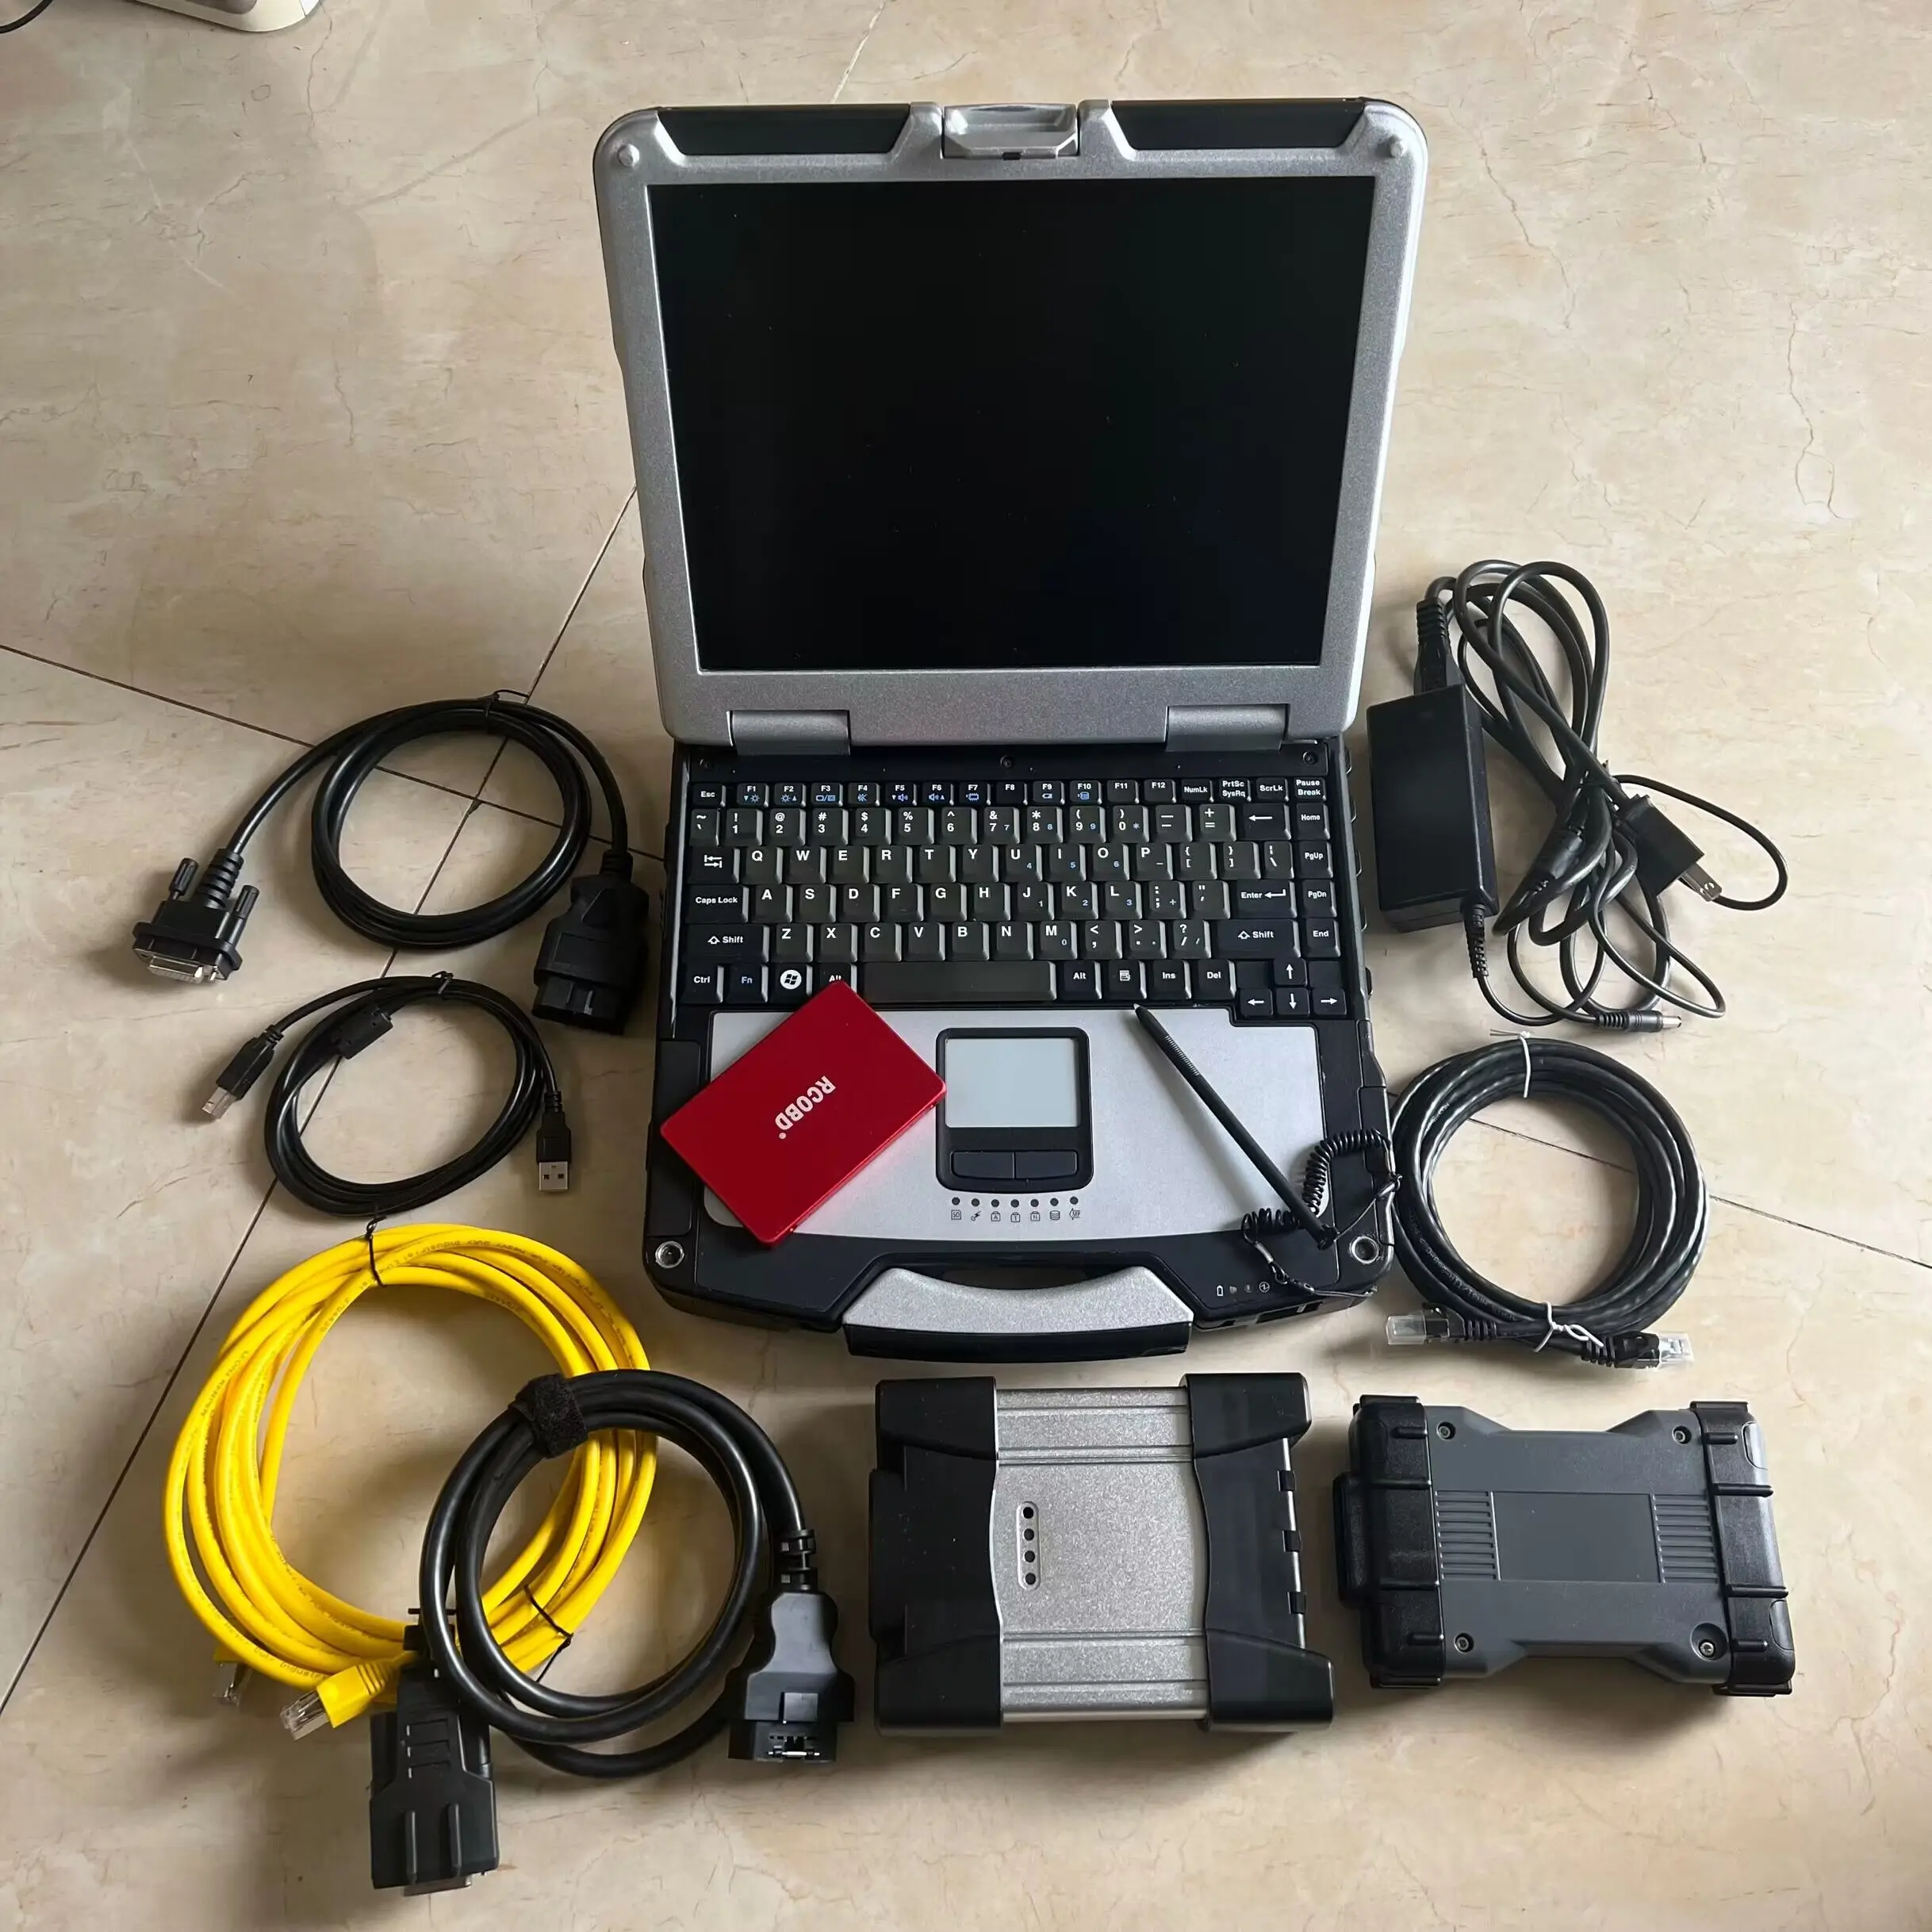 

Diagnose Mb Star c6 Multiplexer Pro Super for Bm*w Icom Next 2in1 Hdd 1tb Software with Laptop Cf31 i5 6g Full Set Ready to Use